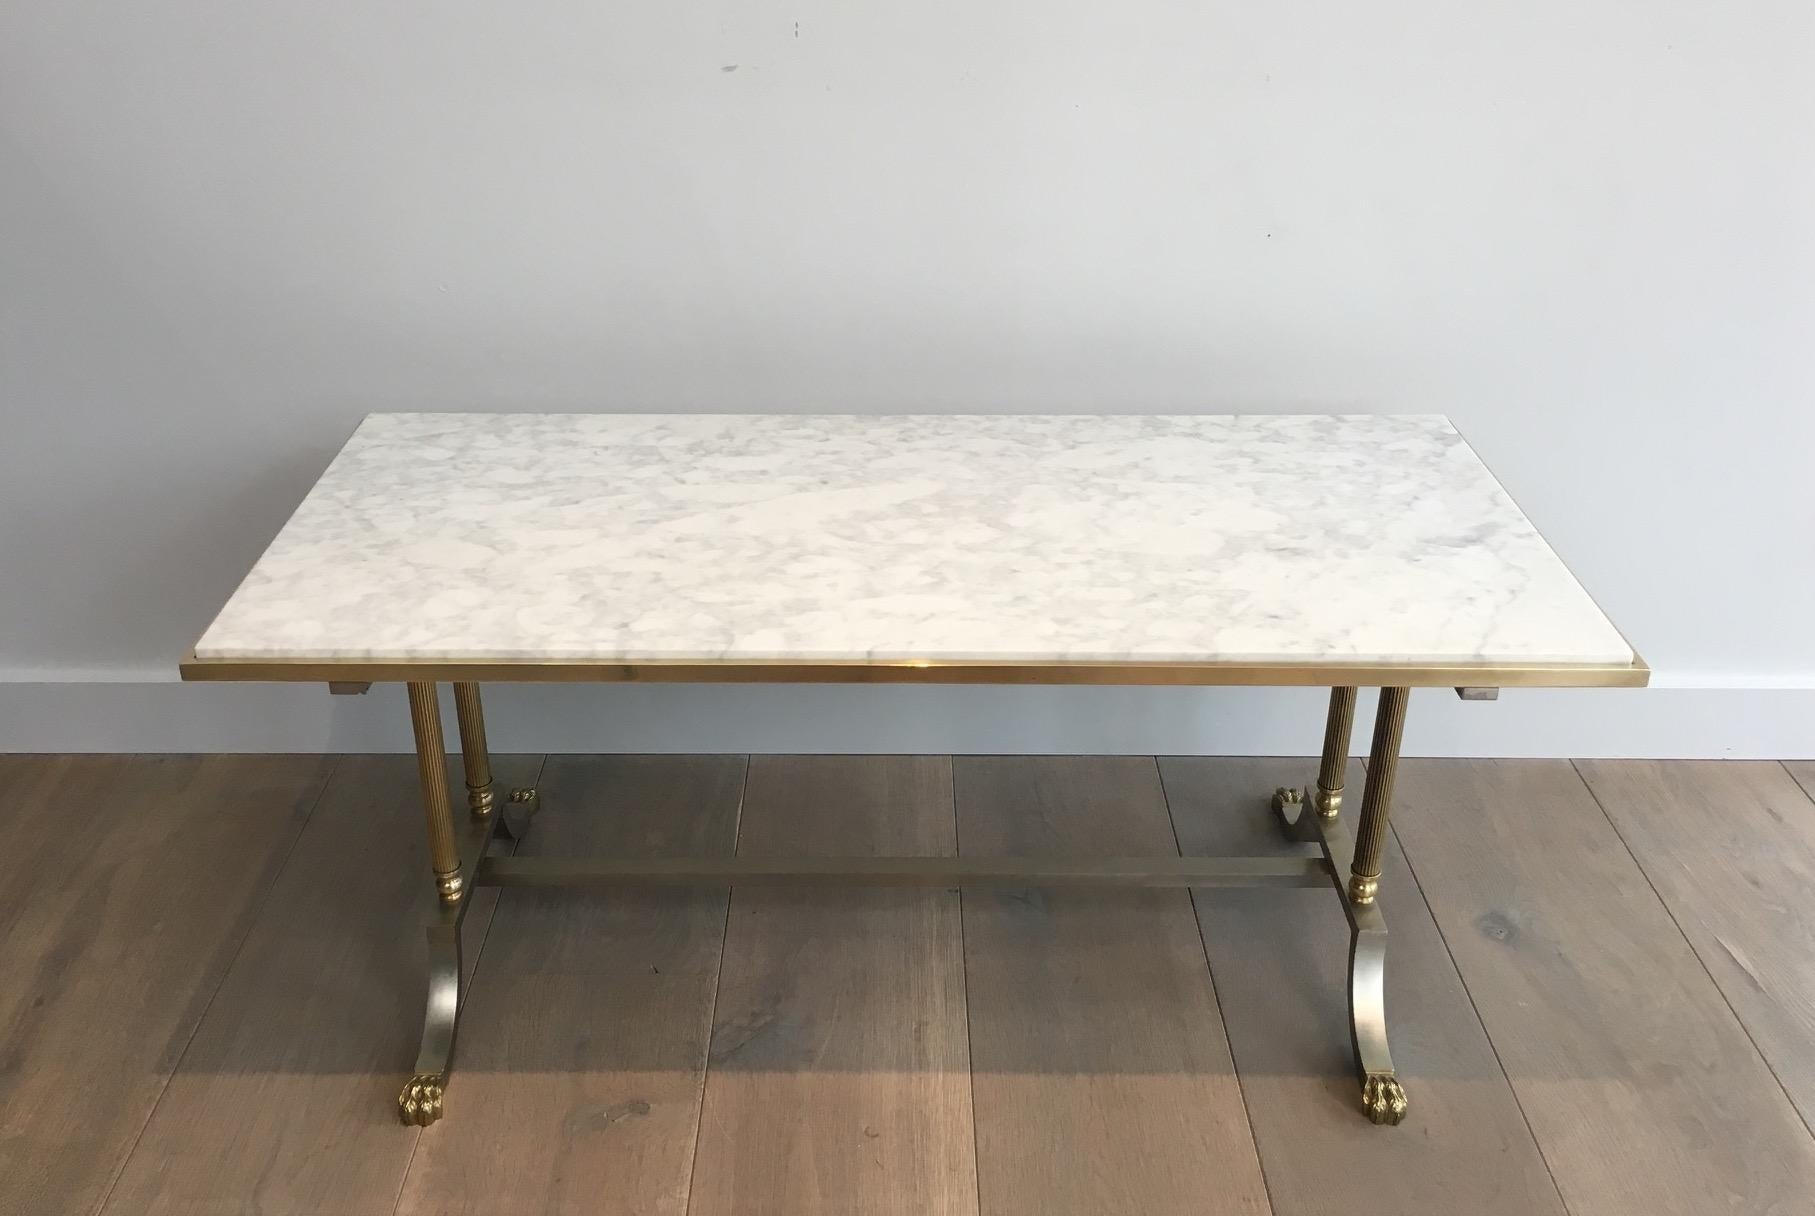 This very nice neoclassical coffee table is made of a brushed steel base with bronze claw feet and brass columns. The top is made of a white Carrare marble. This is a beautiful model from Maison Jansen. French, circa 1940.